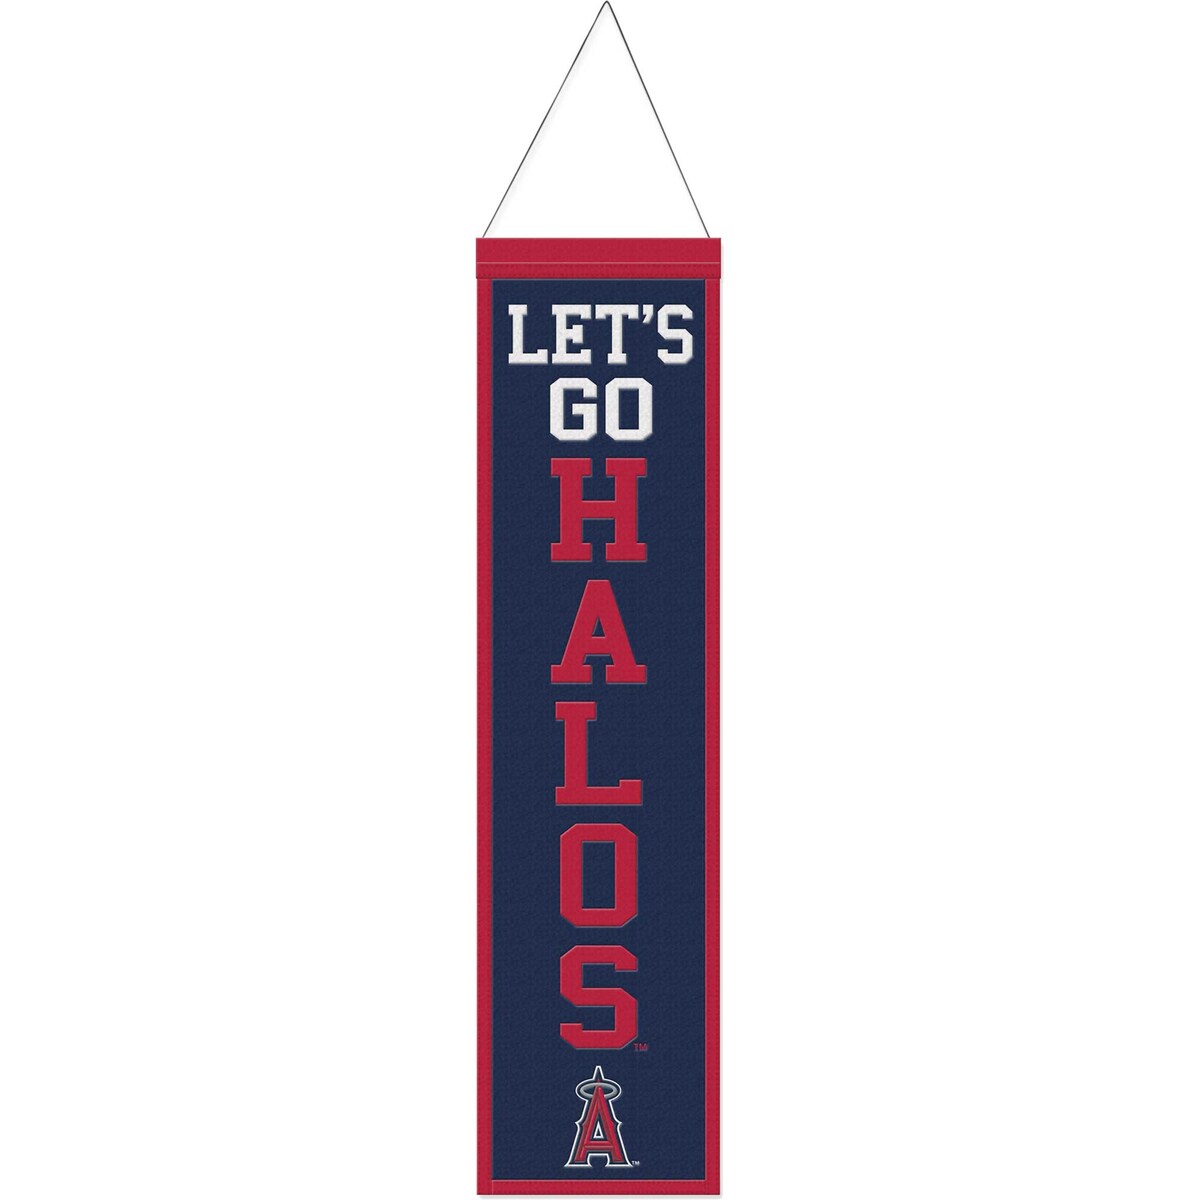 Display your Los Angeles Angels fandom tastefully by adding this WinCraft Wool Banner. Featuring the team's slogan and vibrant graphics, this banner lets everyone know who you rep every game day. The ready-to-hang feature makes it quick and easy to place wherever you feel the Los Angeles Angels vibes are needed.Measures approx. 8'' x 32''Single-sided designOfficially licensedReady to hangMaterial: 70% Wool/30% PolyesterImportedBrand: WinCraftWipe clean with a damp clothEmbroidered graphics